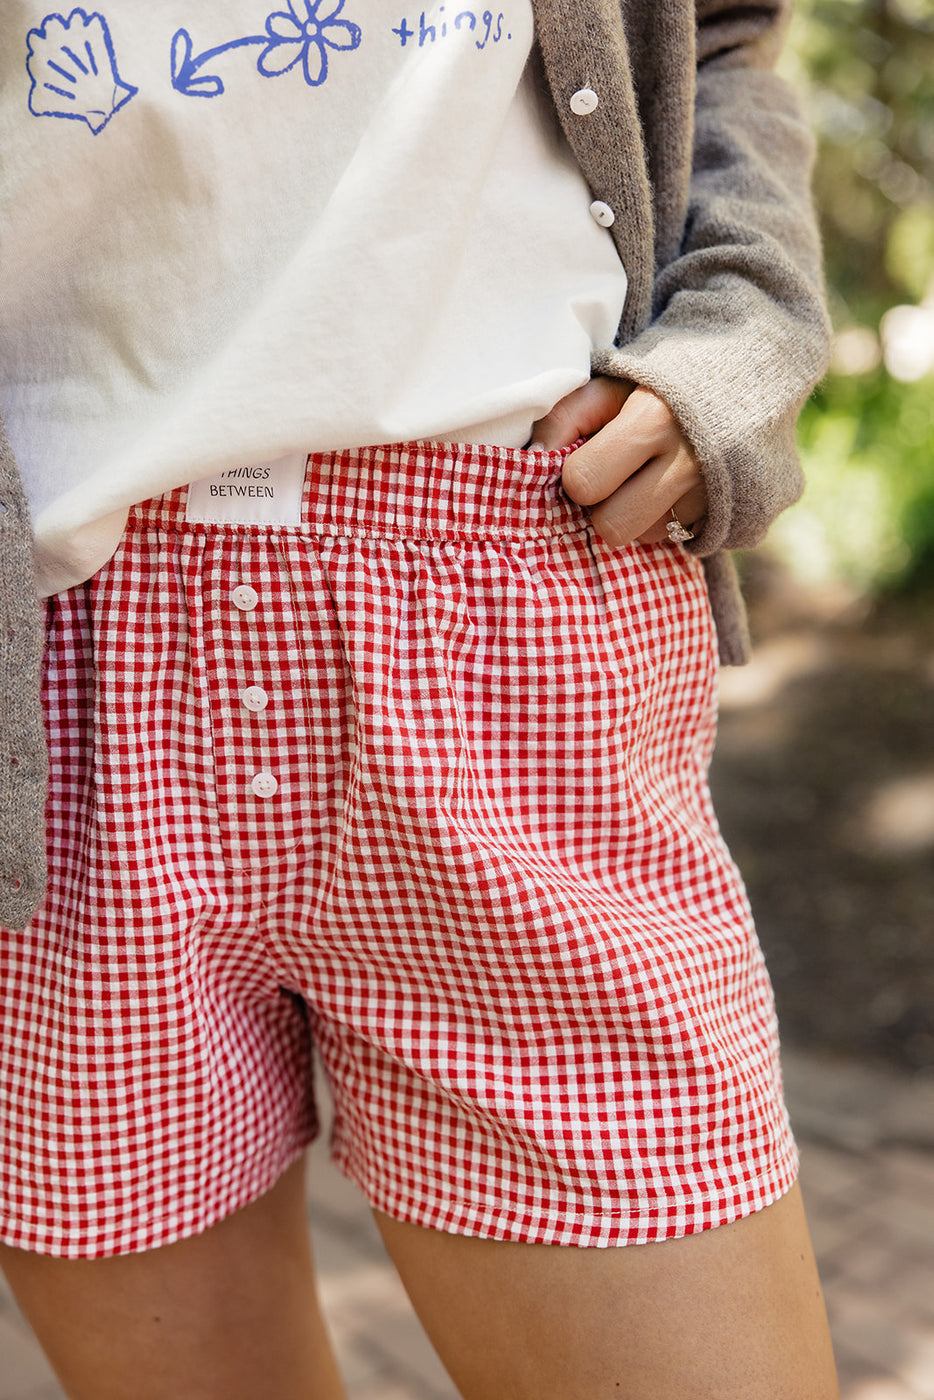 a person wearing red and white checkered shorts